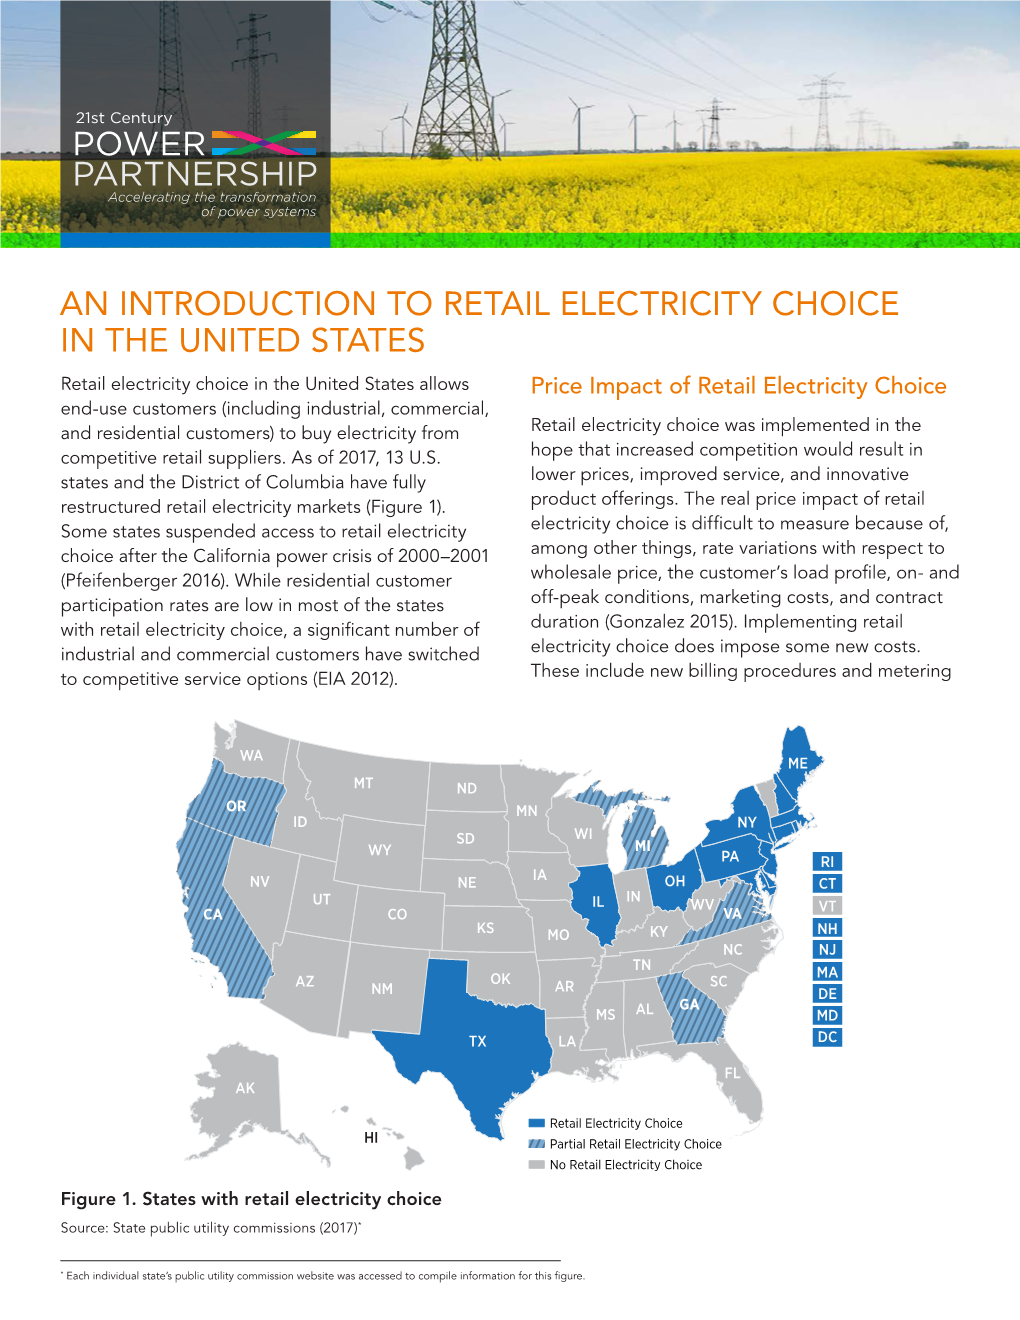 An Introduction to Retail Electricity Choice in the United States